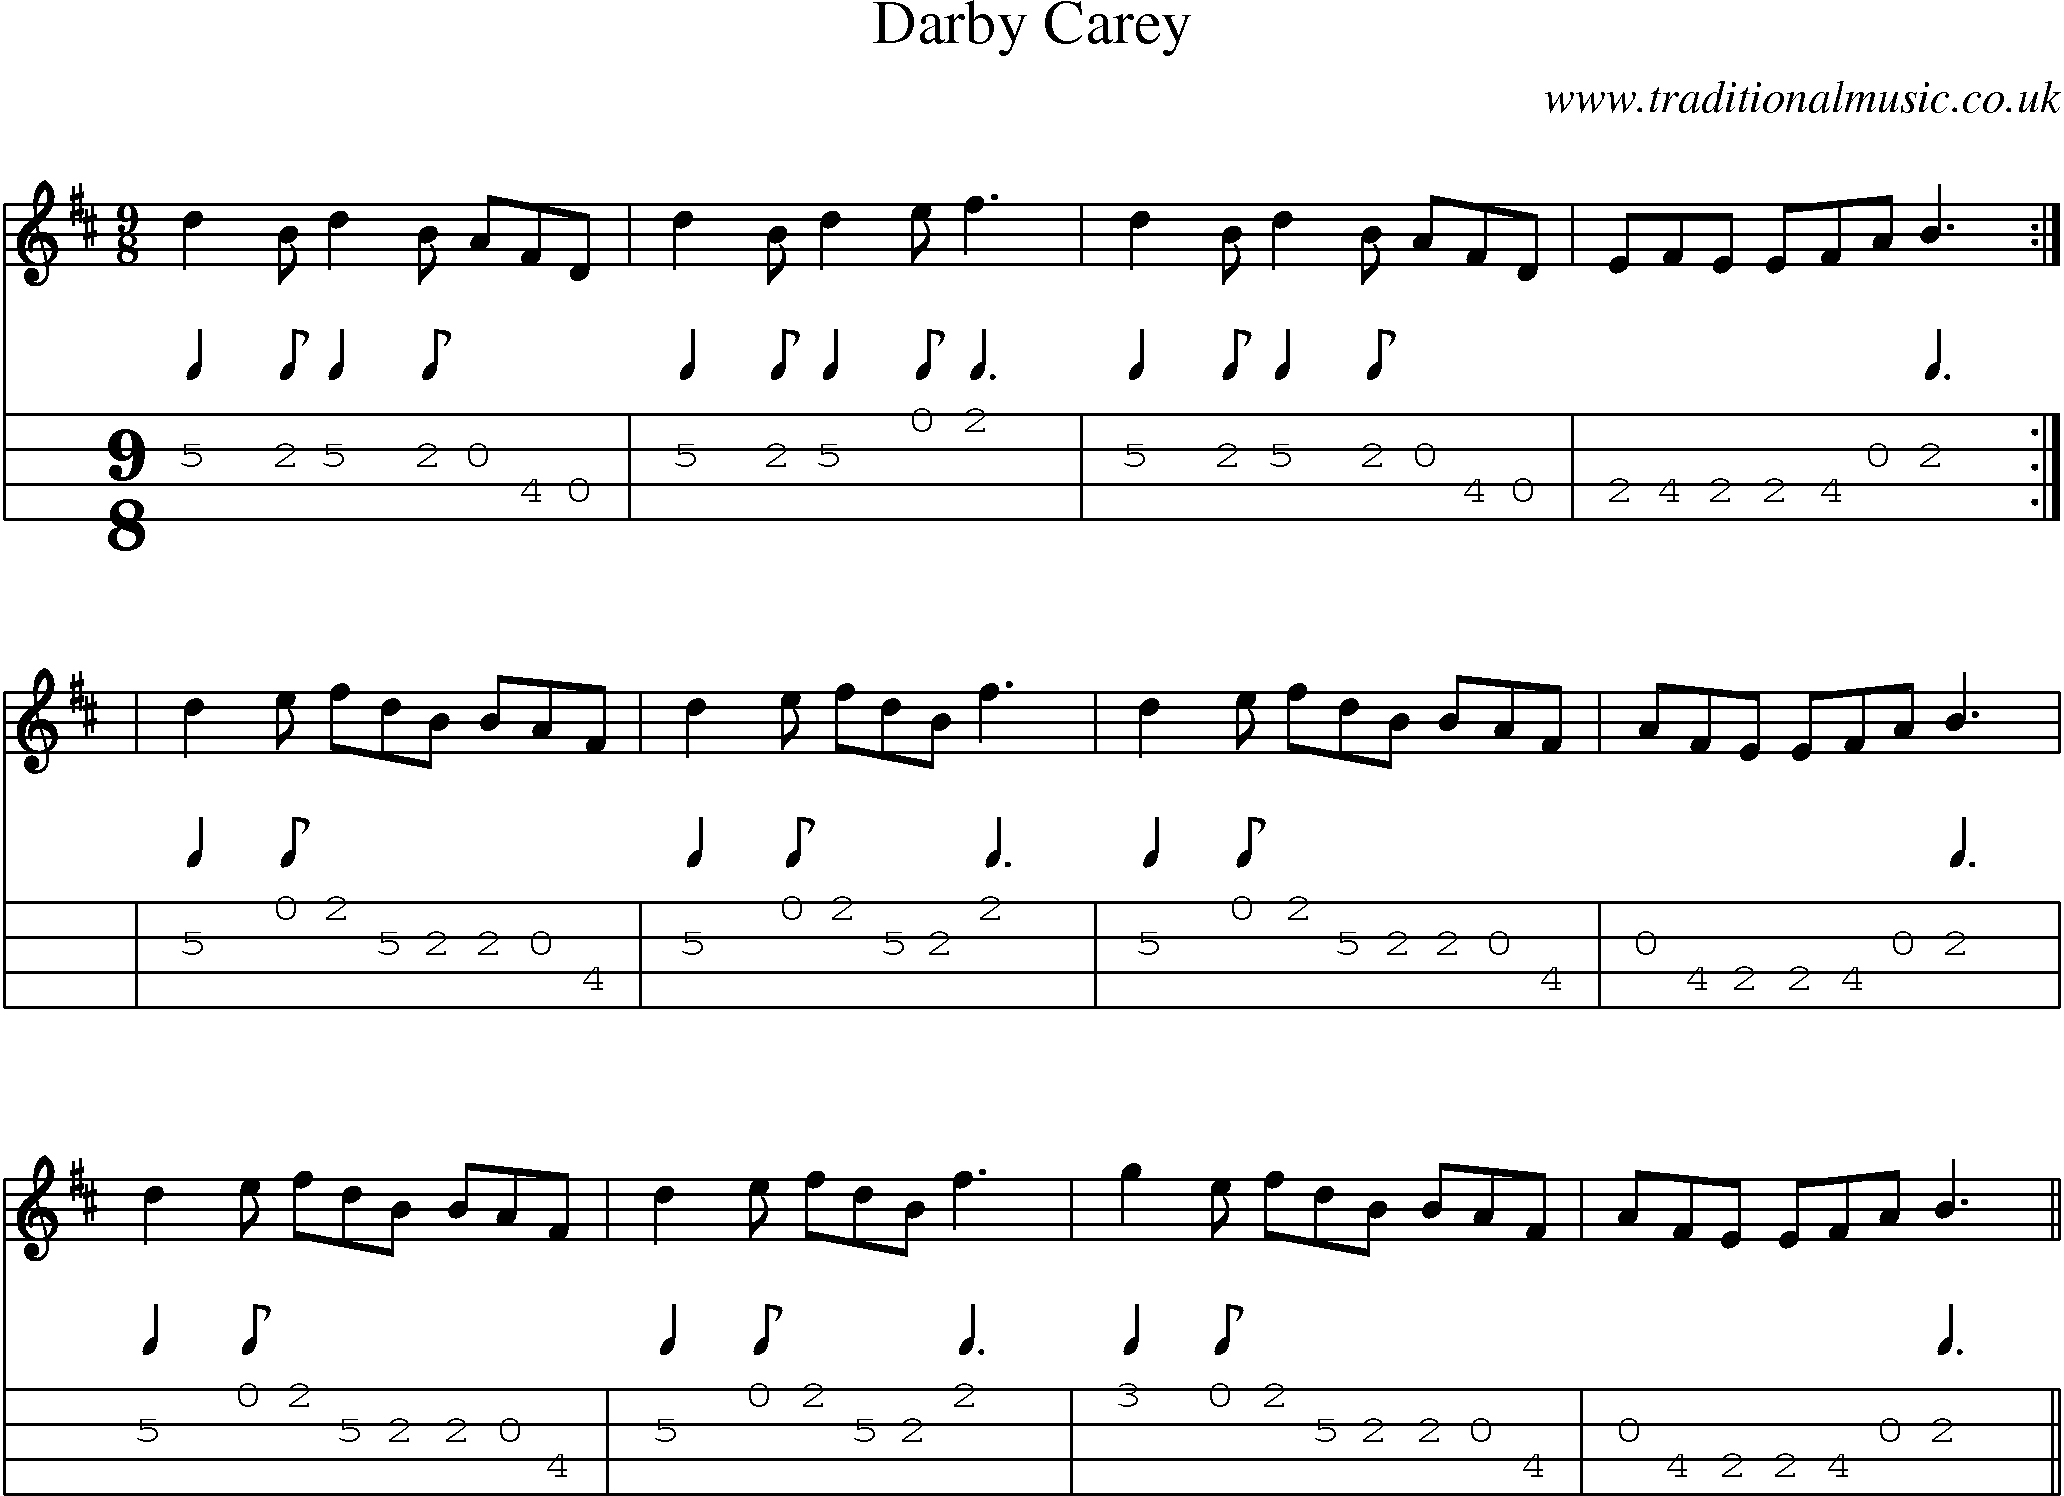 Music Score and Mandolin Tabs for Darby Carey